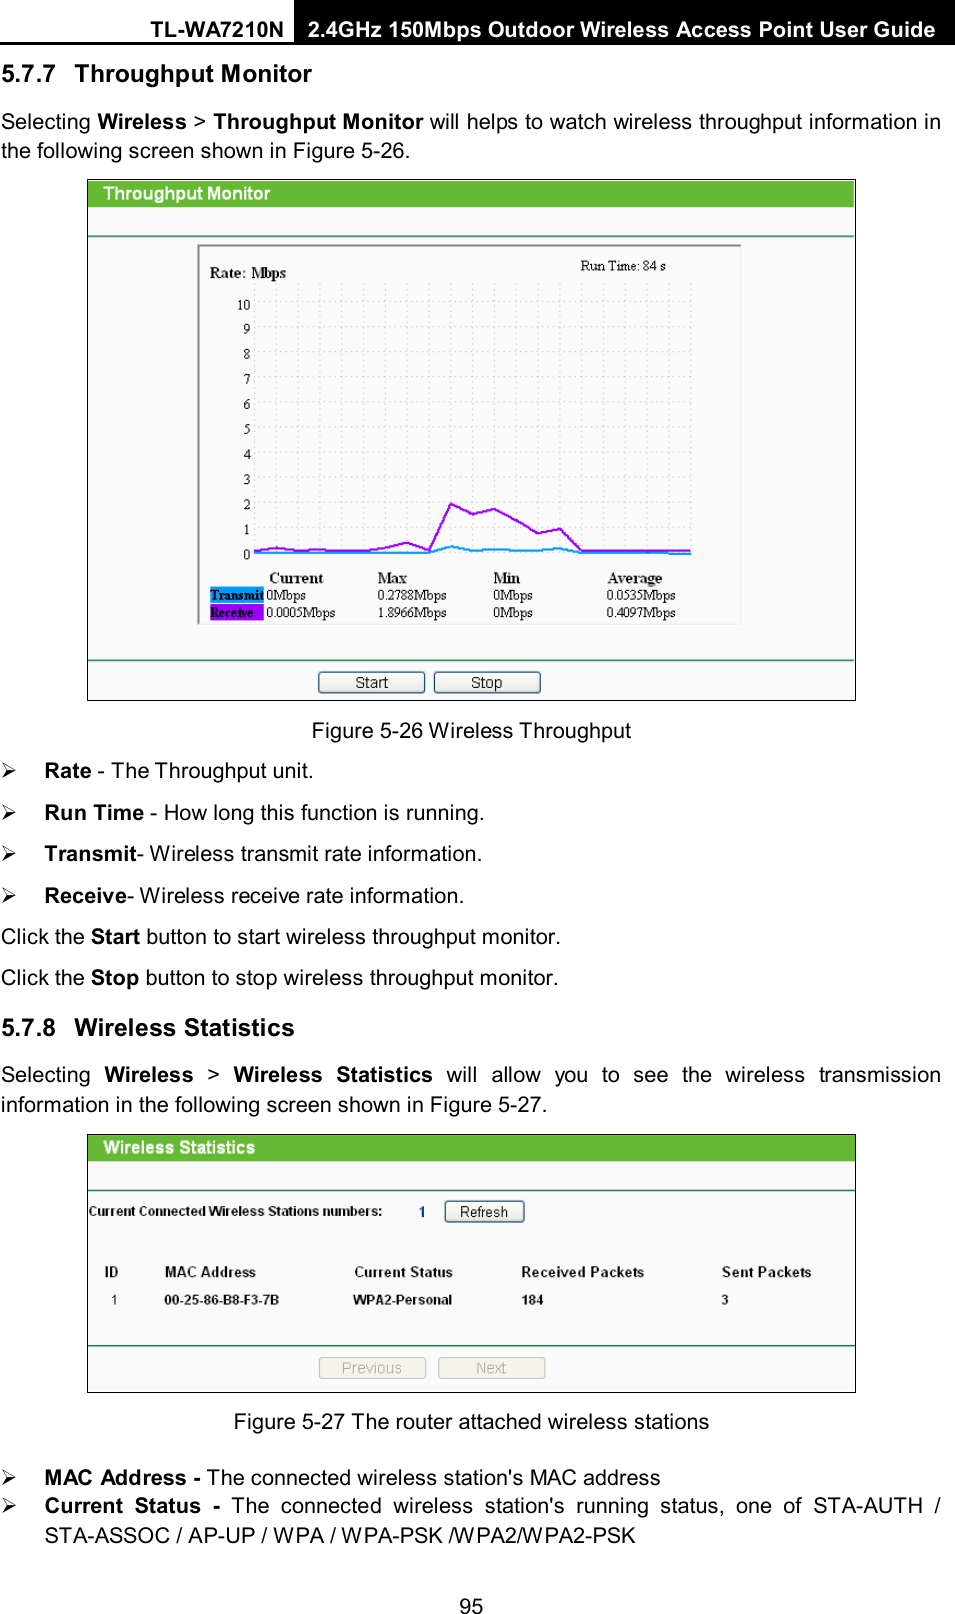 TL-WA7210N 2.4GHz 150Mbps Outdoor Wireless Access Point User Guide  95 5.7.7 Throughput Monitor Selecting Wireless &gt; Throughput Monitor will helps to watch wireless throughput information in the following screen shown in Figure 5-26.    Figure 5-26 Wireless Throughput  Rate - The Throughput unit.    Run Time - How long this function is running.    Transmit- Wireless transmit rate information.    Receive- Wireless receive rate information.   Click the Start button to start wireless throughput monitor. Click the Stop button to stop wireless throughput monitor. 5.7.8 Wireless Statistics Selecting  Wireless &gt;  Wireless Statistics will  allow you to see the wireless  transmission information in the following screen shown in Figure 5-27.    Figure 5-27 The router attached wireless stations  MAC Address - The connected wireless station&apos;s MAC address  Current Status - The connected wireless station&apos;s running status, one of STA-AUTH / STA-ASSOC / AP-UP / WPA / WPA-PSK /WPA2/WPA2-PSK 